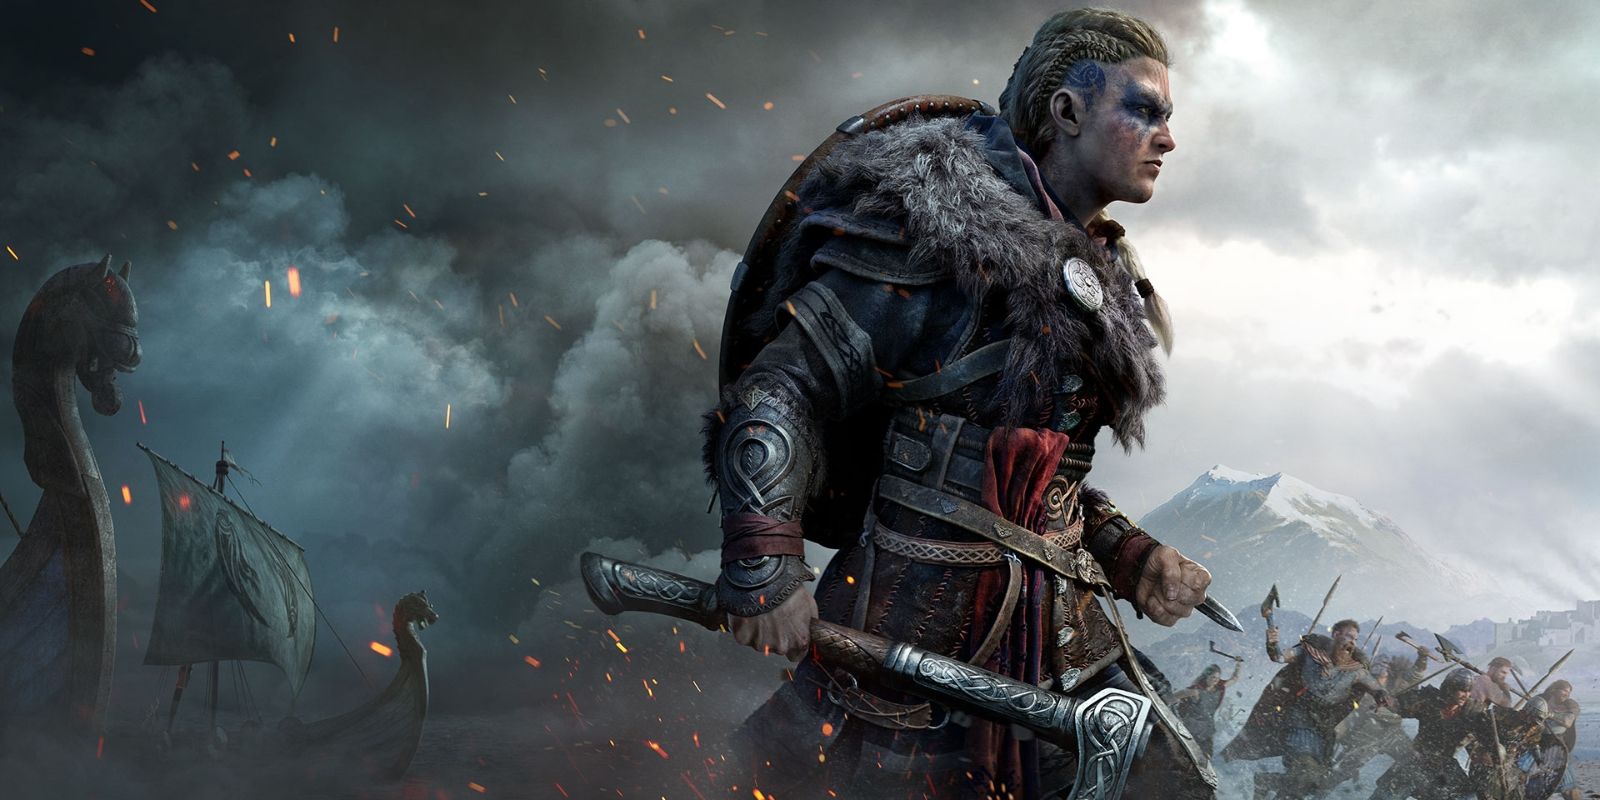 Eivor wields an axe along with other viking warriors in a still for Assassin's Creed: Valhalla